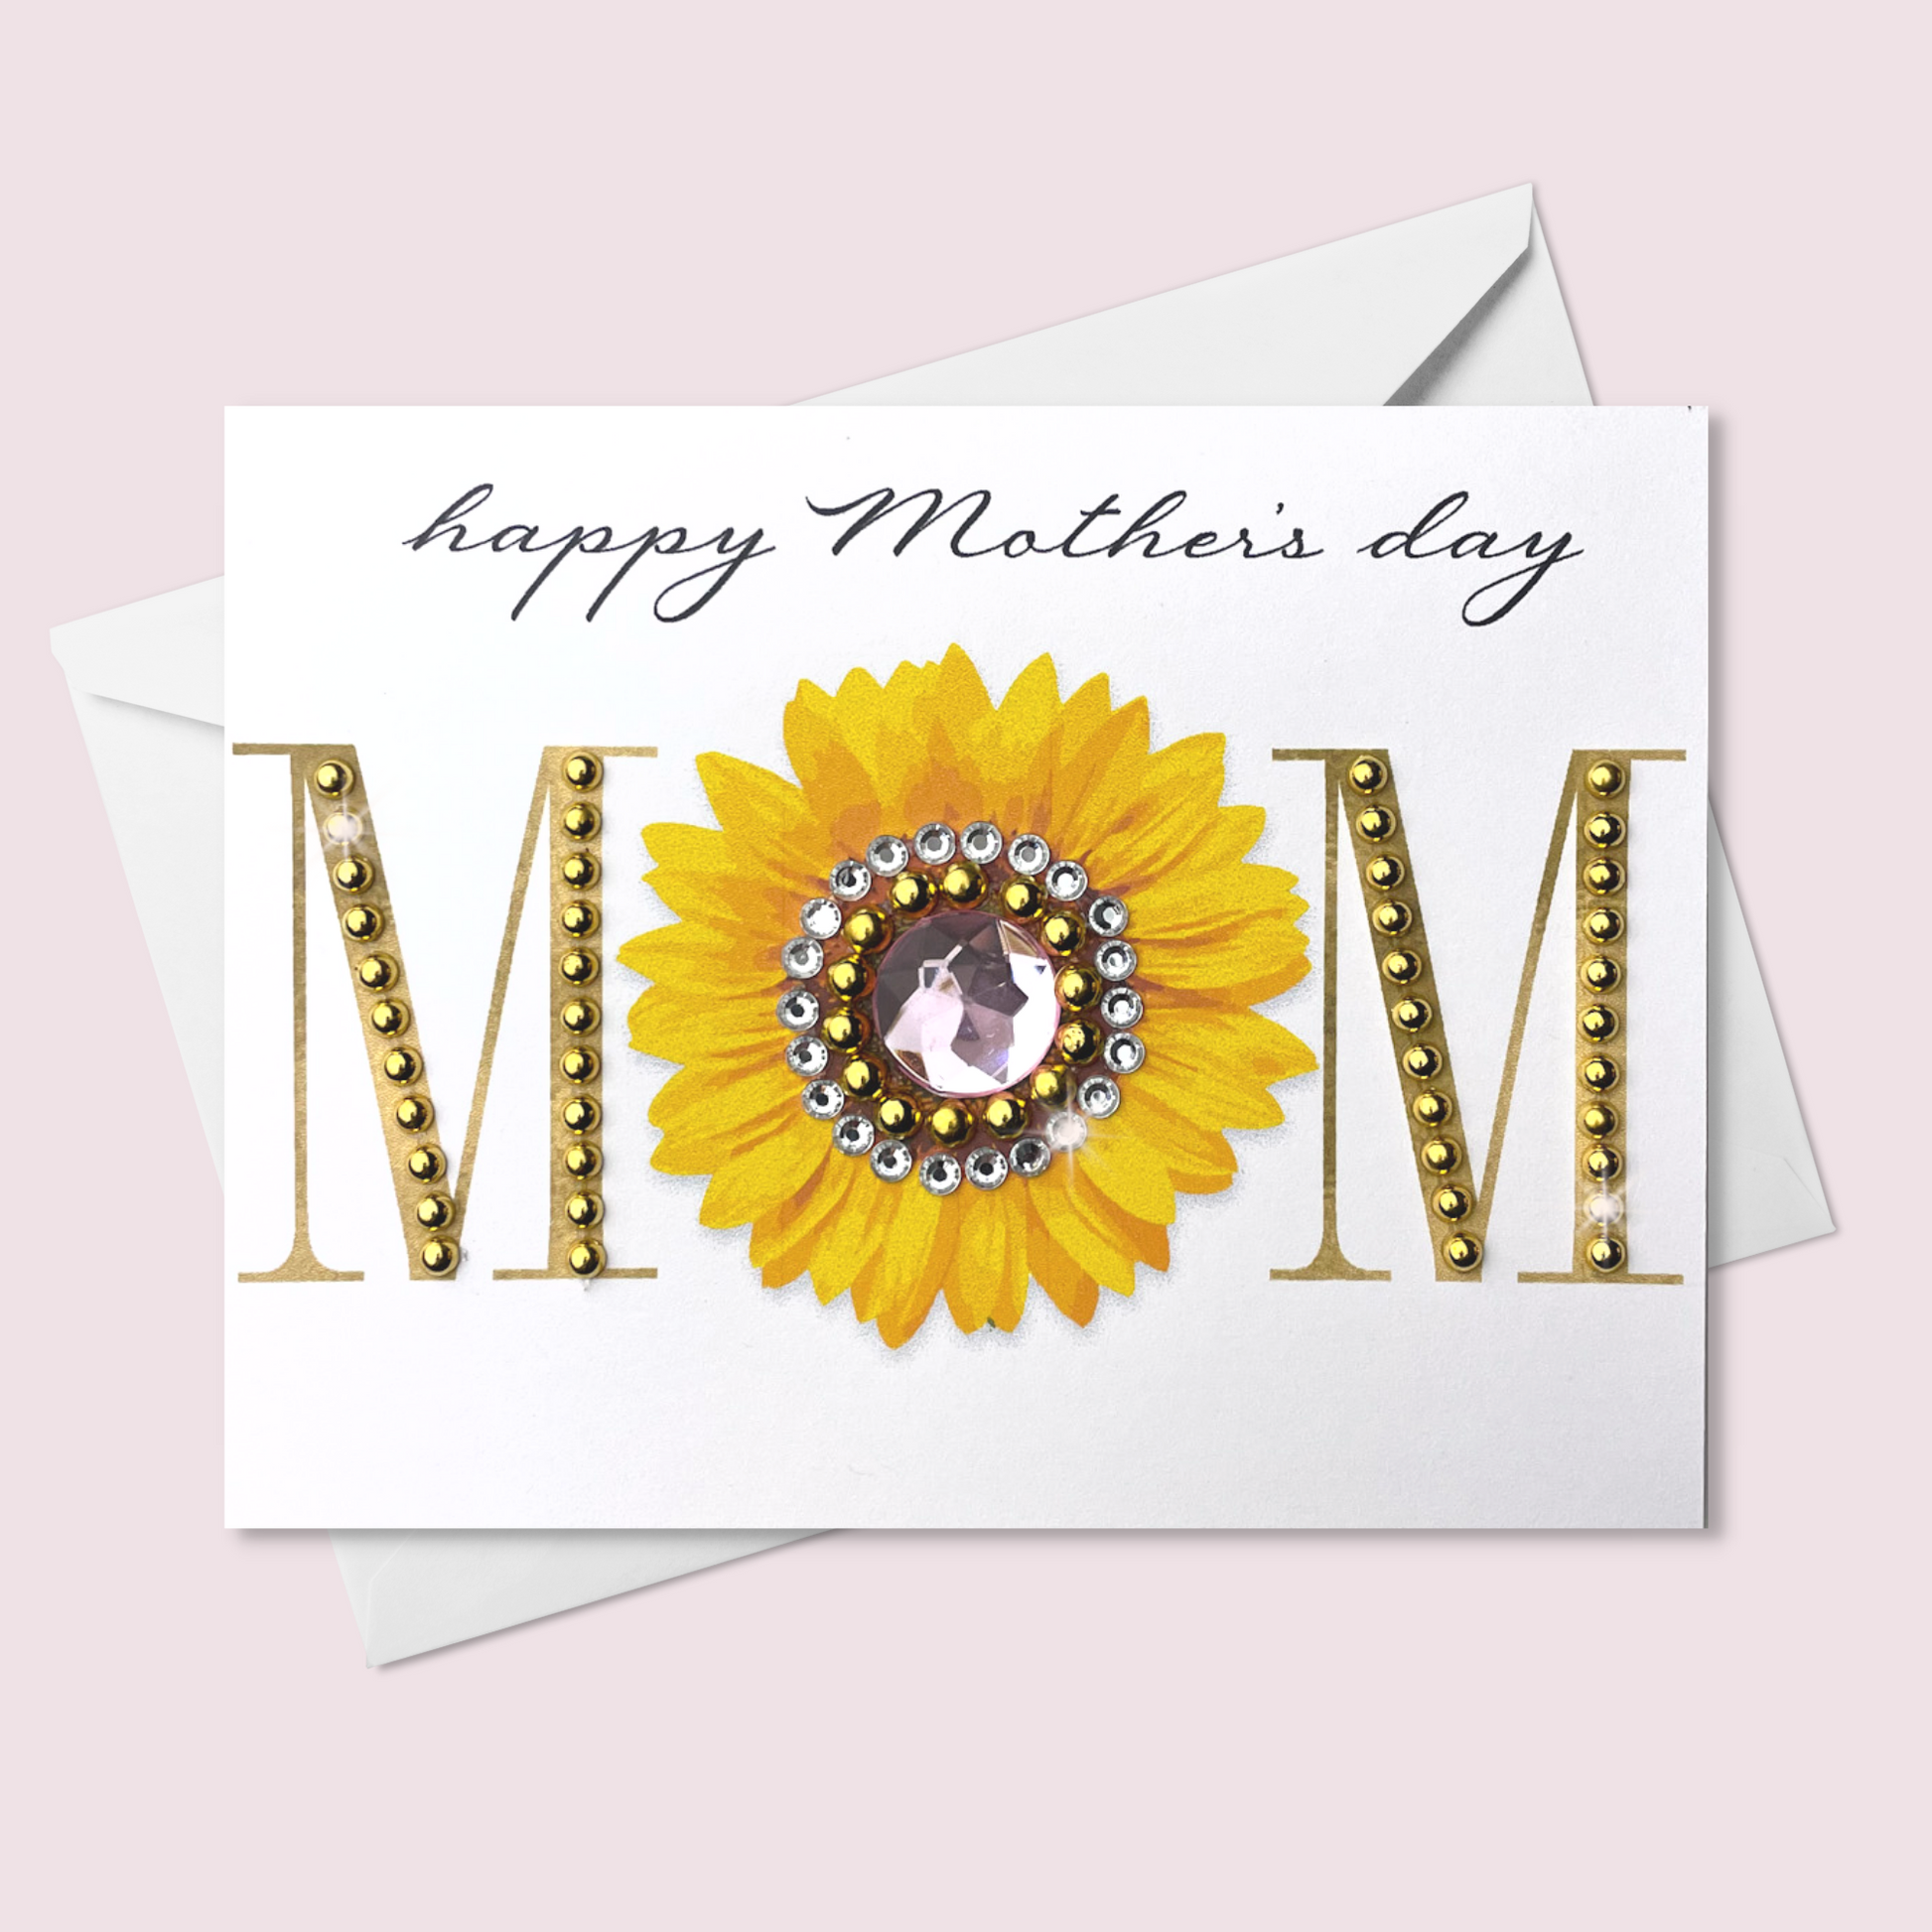 Happy mother's day mom sunflower